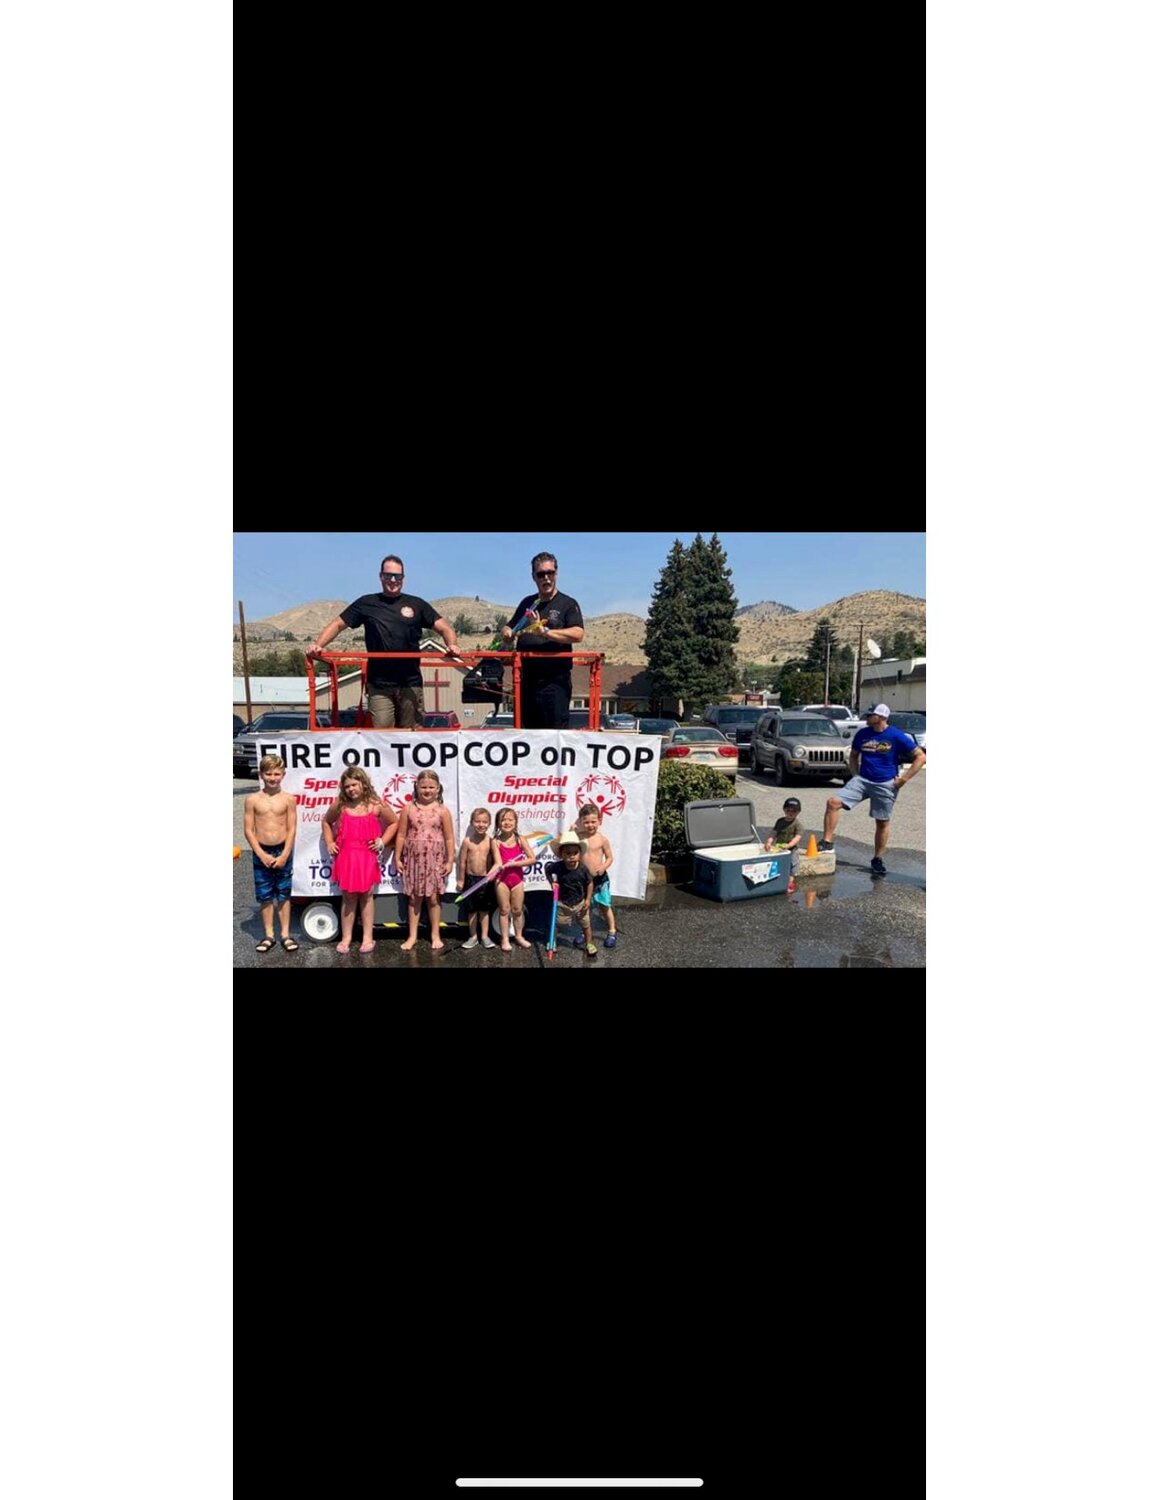 Last summer, children sprayed water at police officers and firefighters as part of a fundraiser for the Chelan Special Olympics.